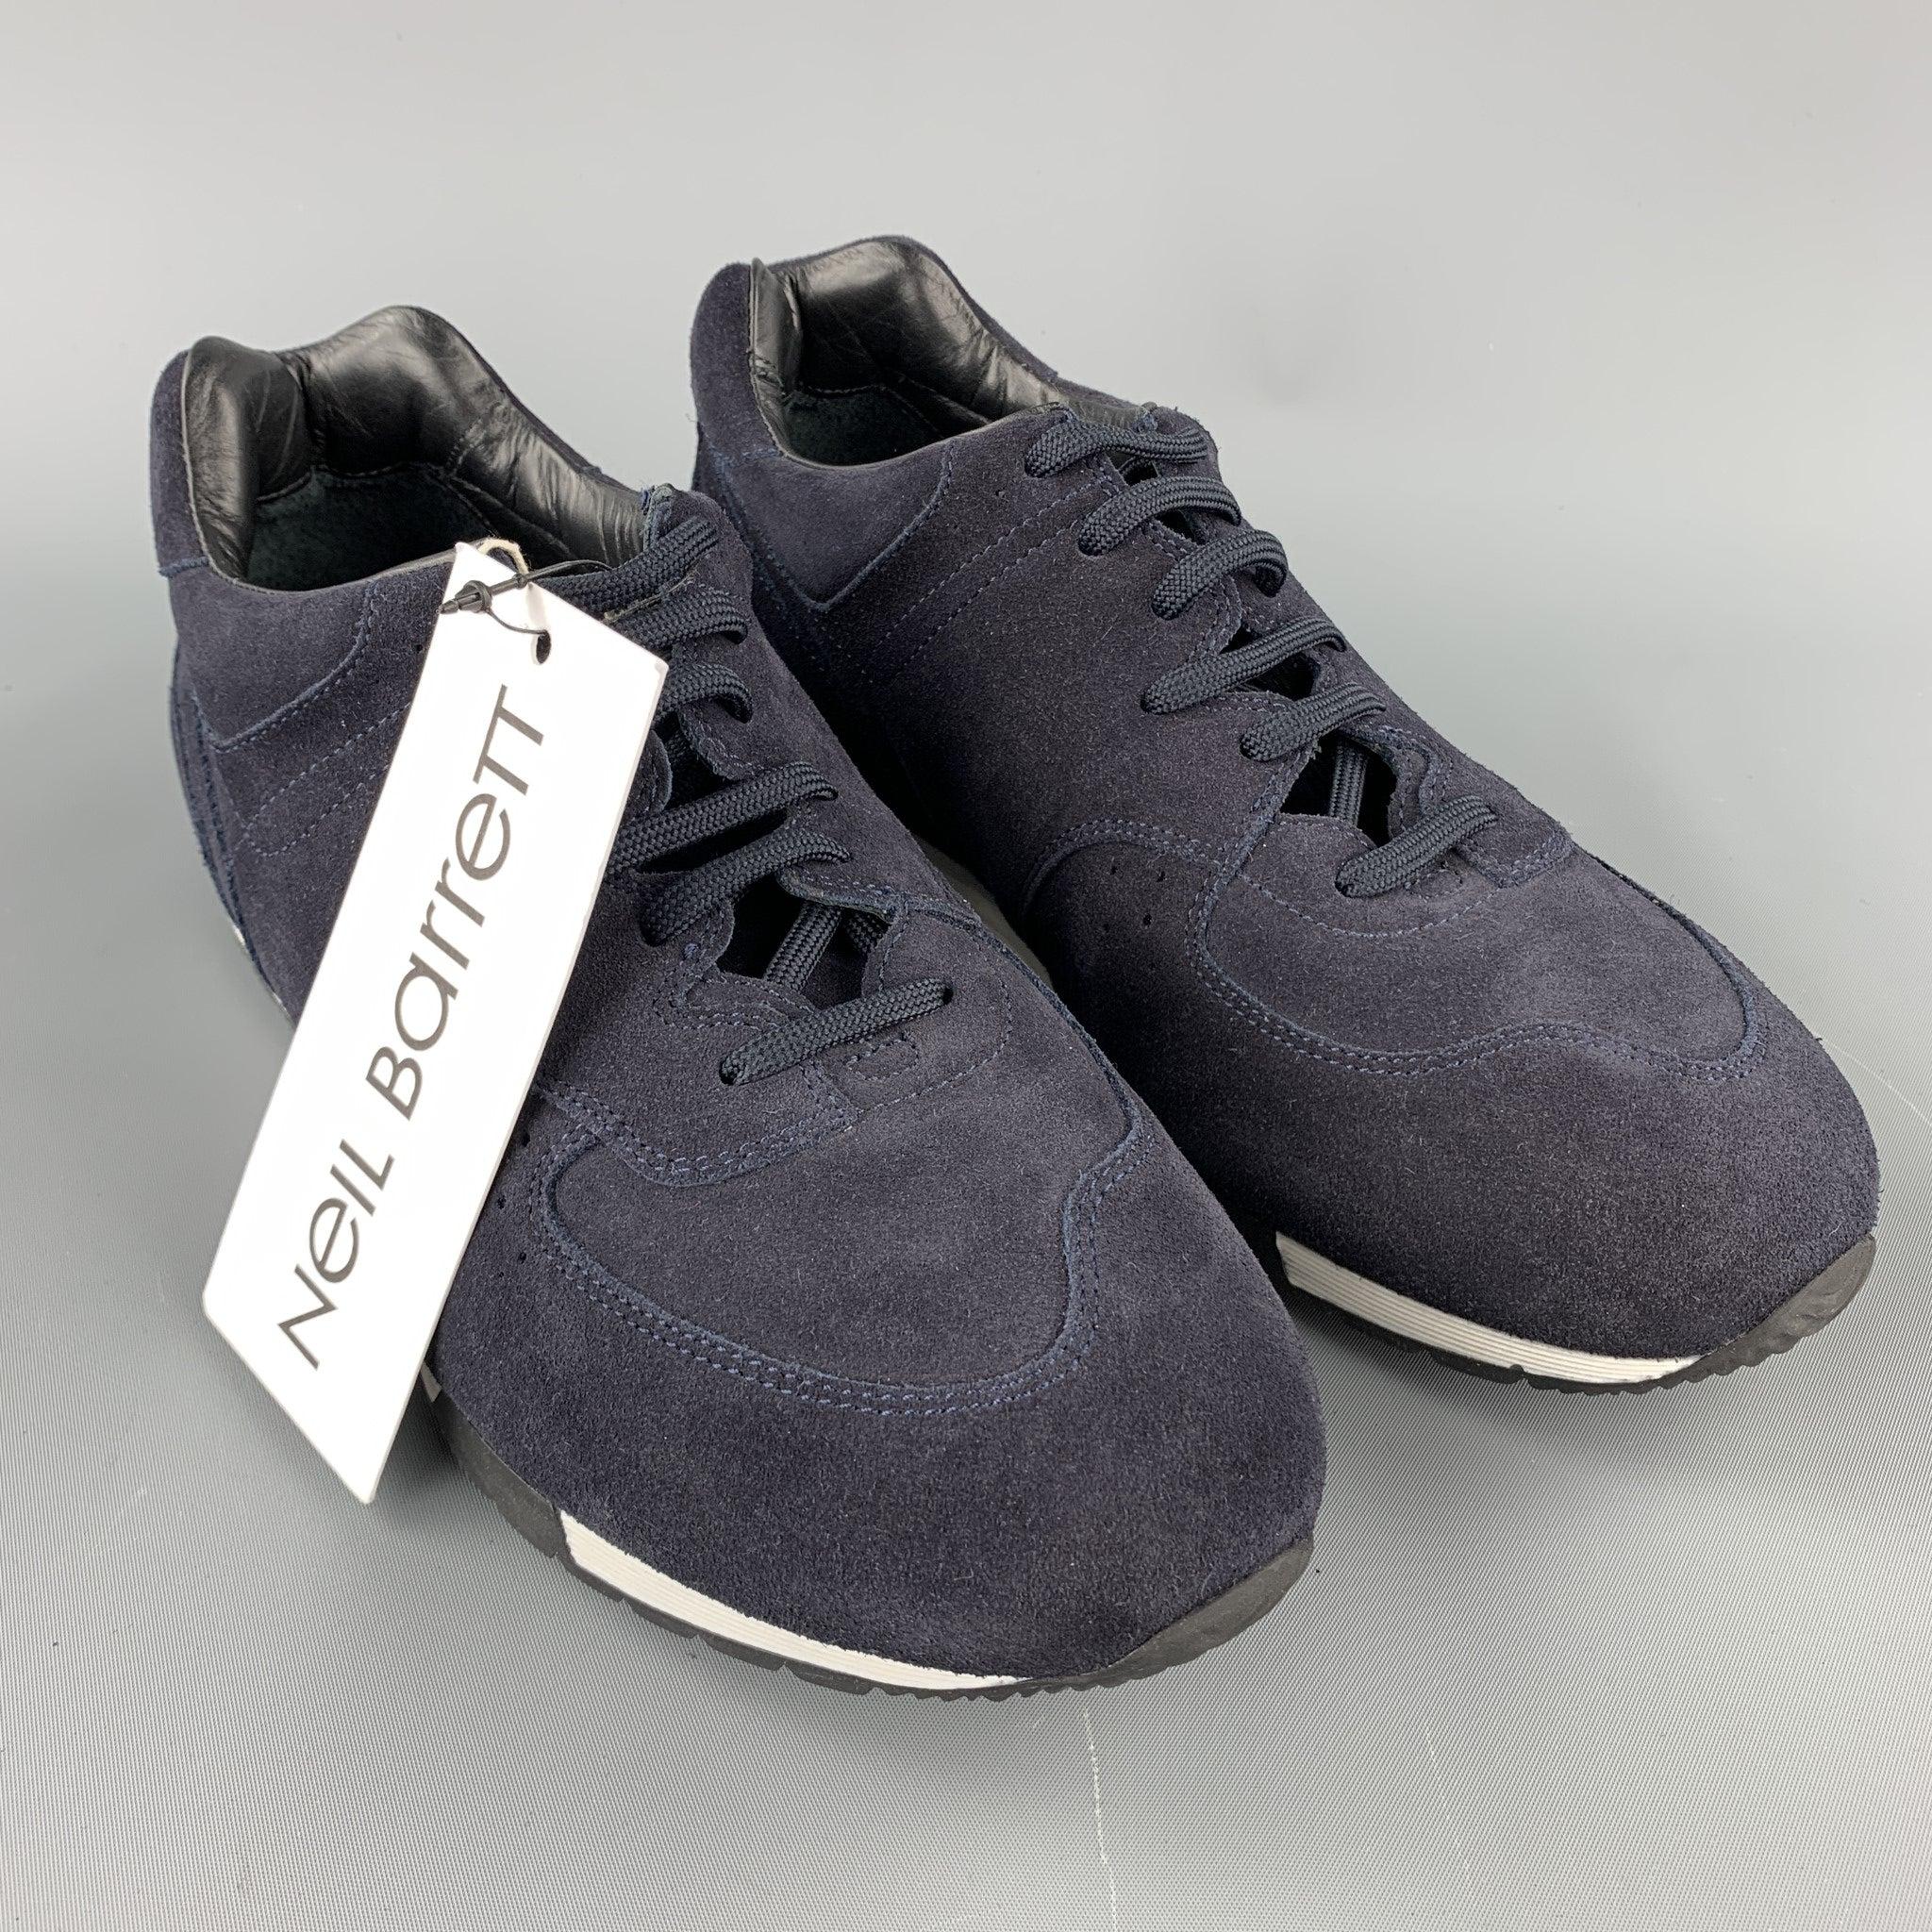 NEIL BARRETT sneakers comes in a navy suede featuring stitching details lace up, and a rubber sole. Made in Italy.New With Box.
 

Marked:   IT 43Outsole: 11.5 inches  x 4 inches 
  
  
 
Reference: 104309
Category: Sneakers
More Details
    
Brand: